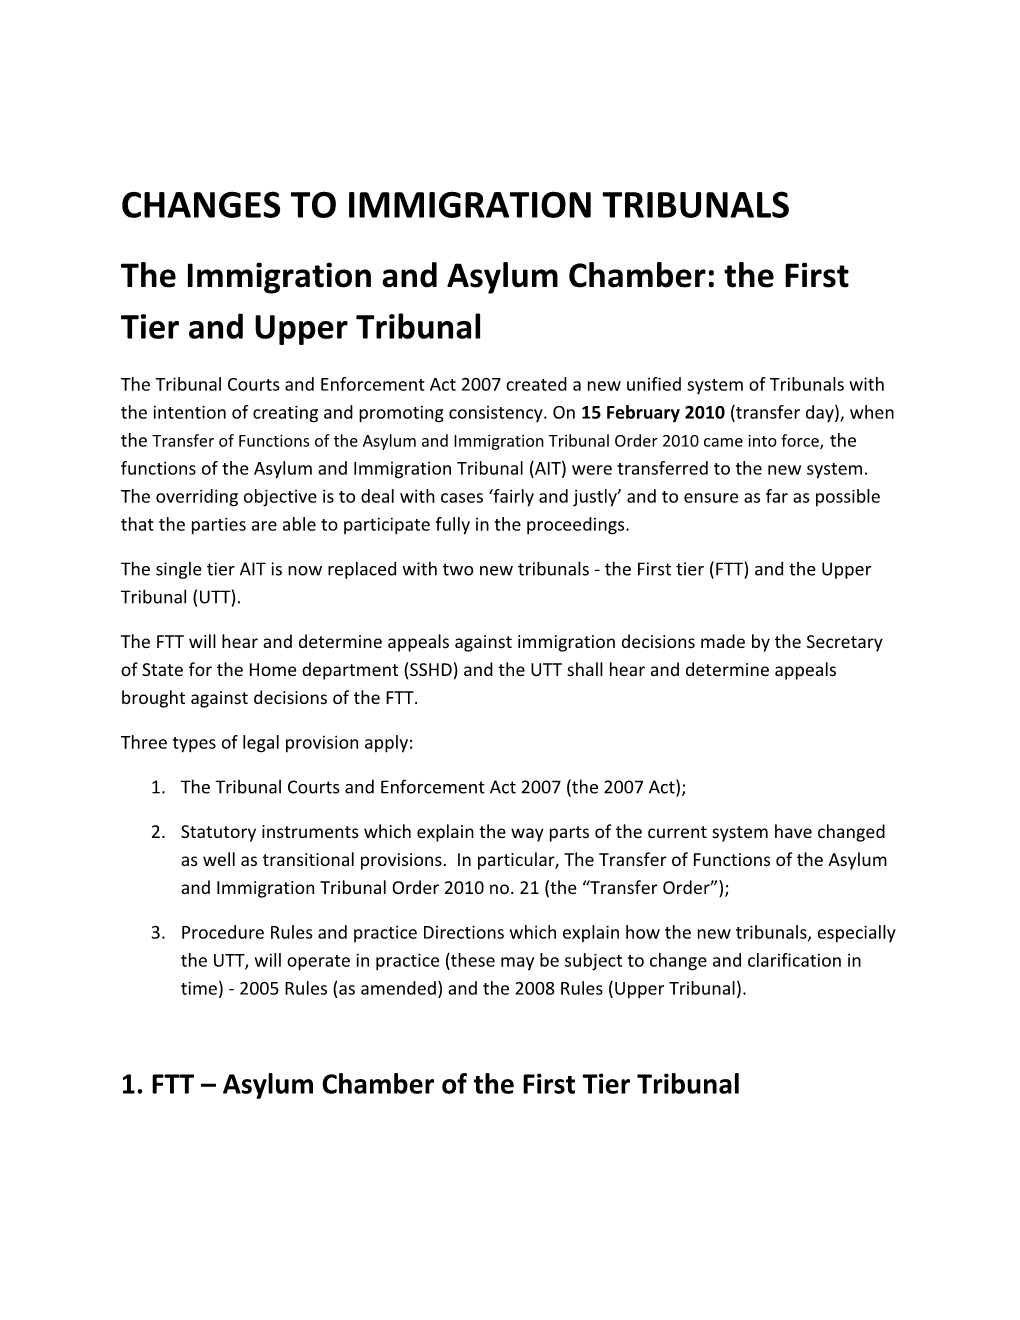 The Immigration and Asylum Chamber: the First Tier and Upper Tribunal